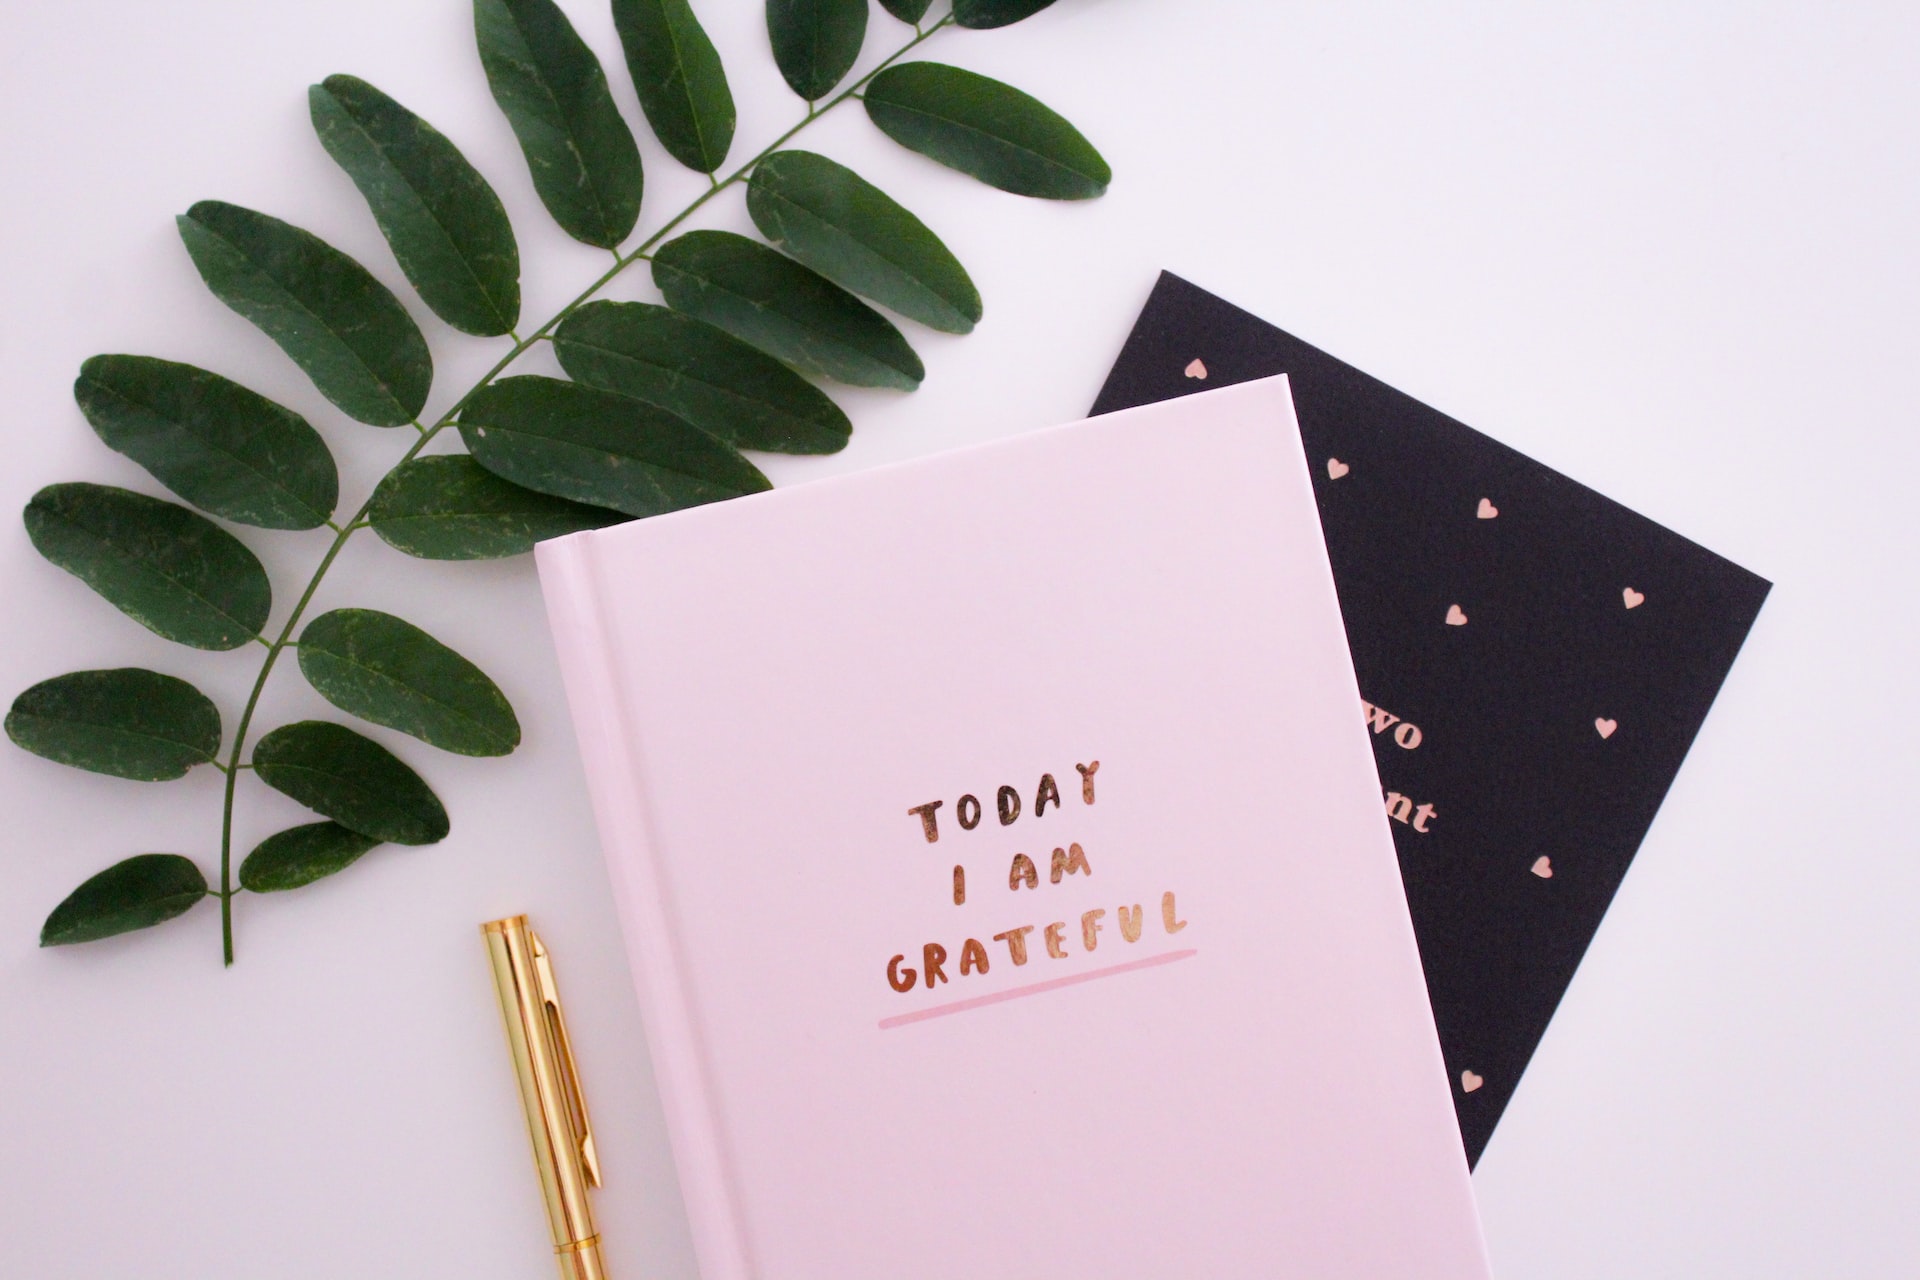 A journal that says "today I am grateful" on the front